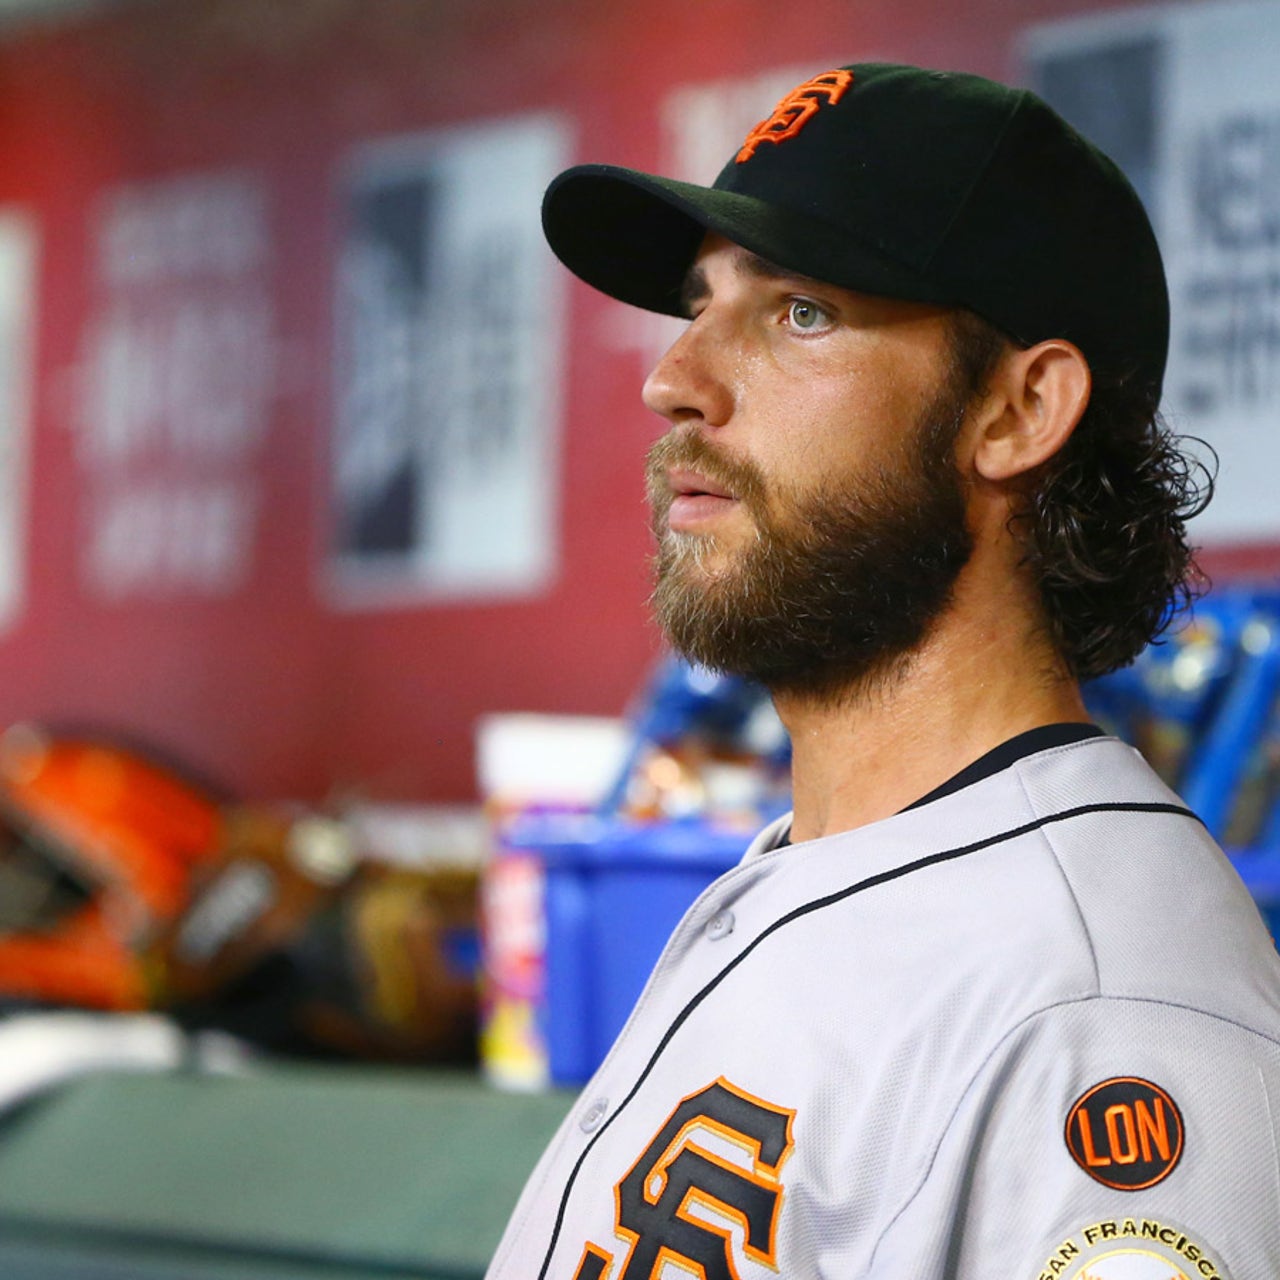 No magic for Bumgarner this time -- ace K's as pinch hitter to end game